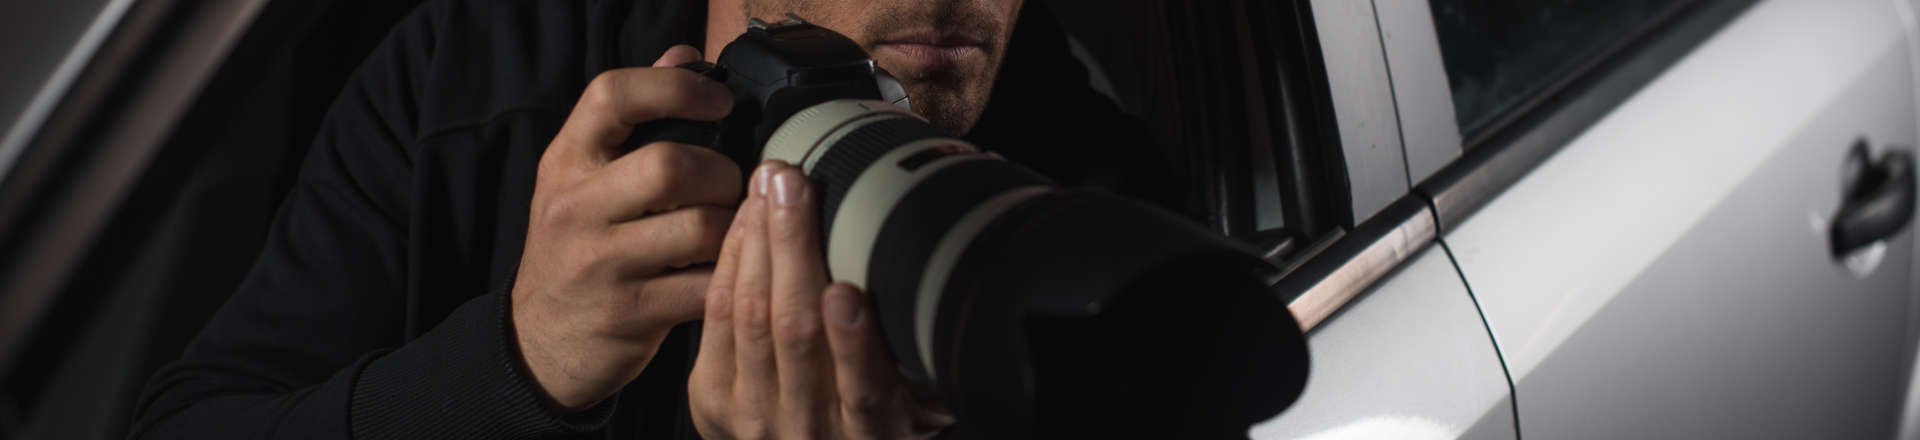 How a Private Investigator Can Help You Find a Missing Person West Hollywood, CA